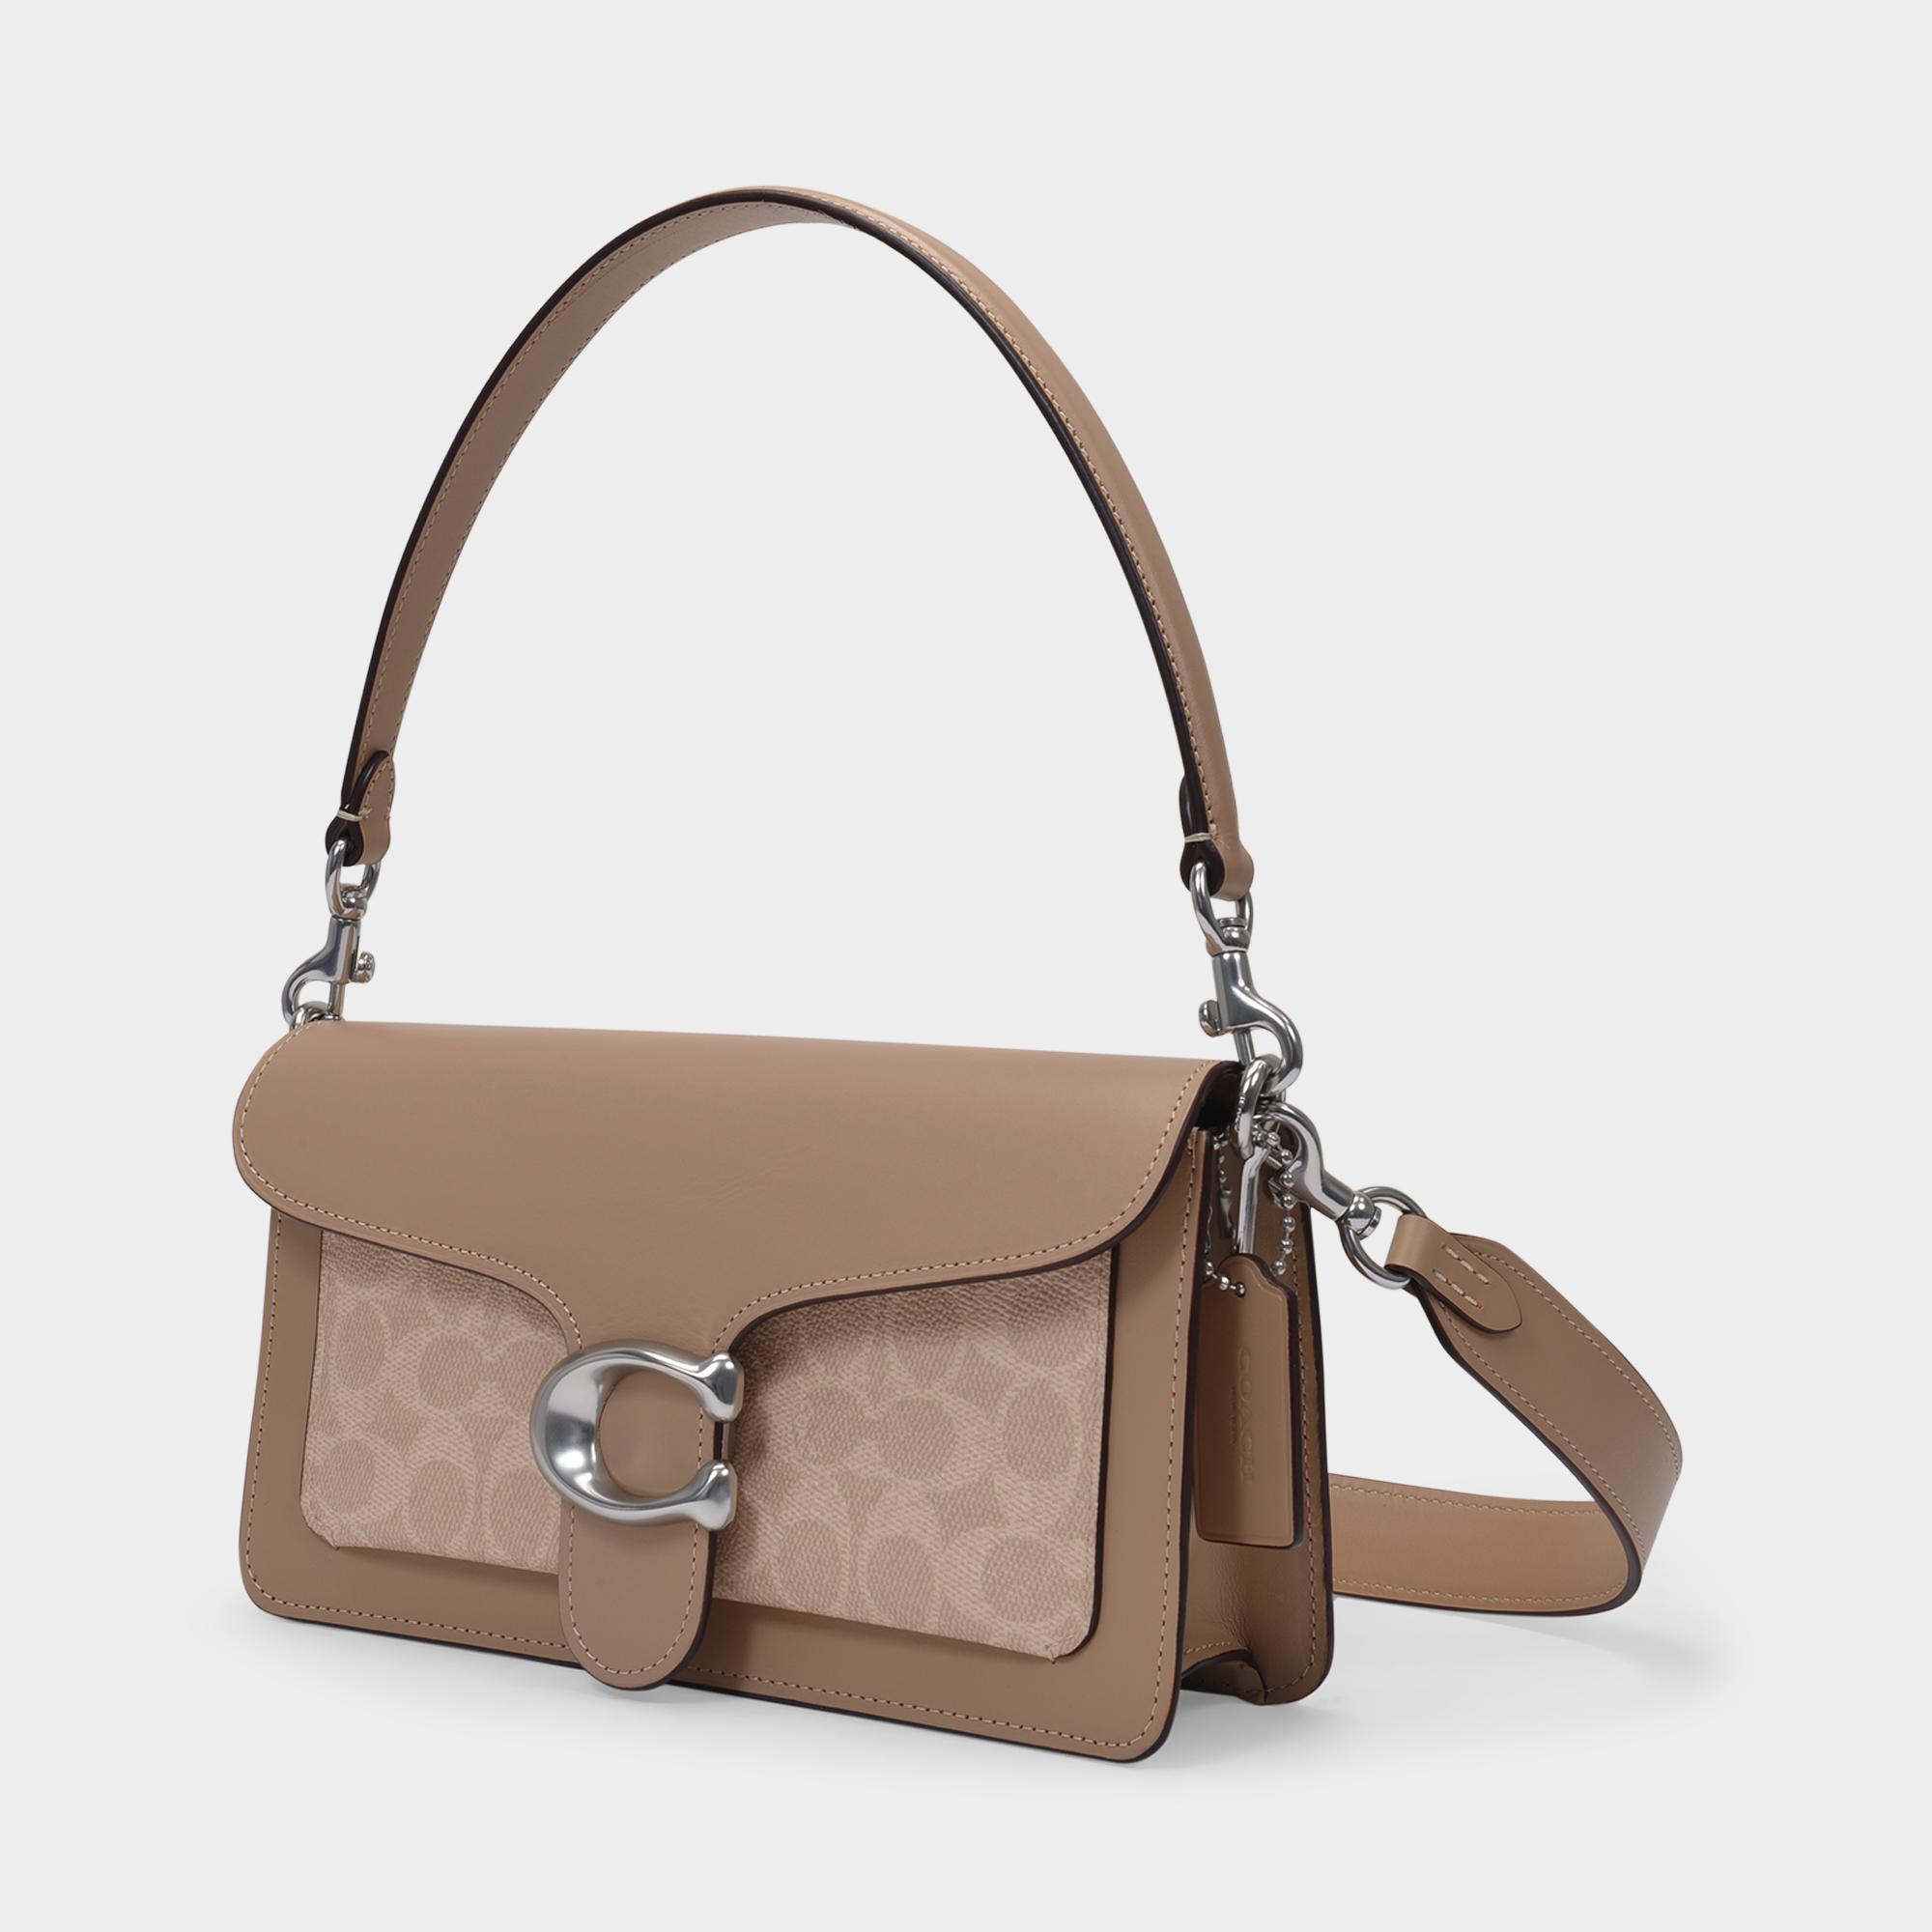 Buy Coach Tabby Shoulder Bag 26 - Taupe